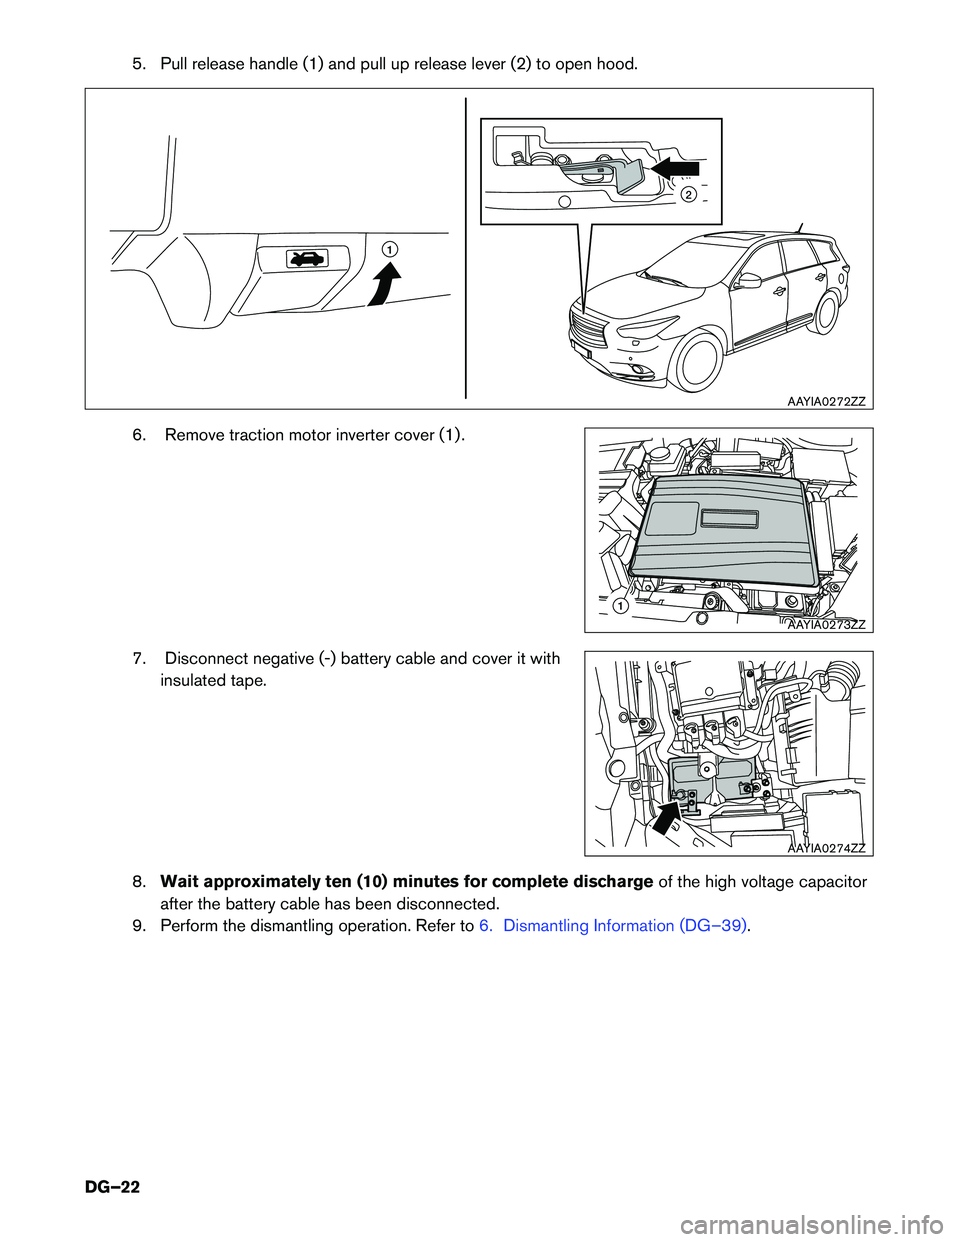 INFINITI QX60 HYBRID 2015  Dismantling Guide 5. Pull release handle (1) and pull up release lever (2) to open hood. 
6. Remove traction motor inverter cover (1) . 
7. Disconnect negative (-) battery cable and cover it withinsulated tape.
8. Wait